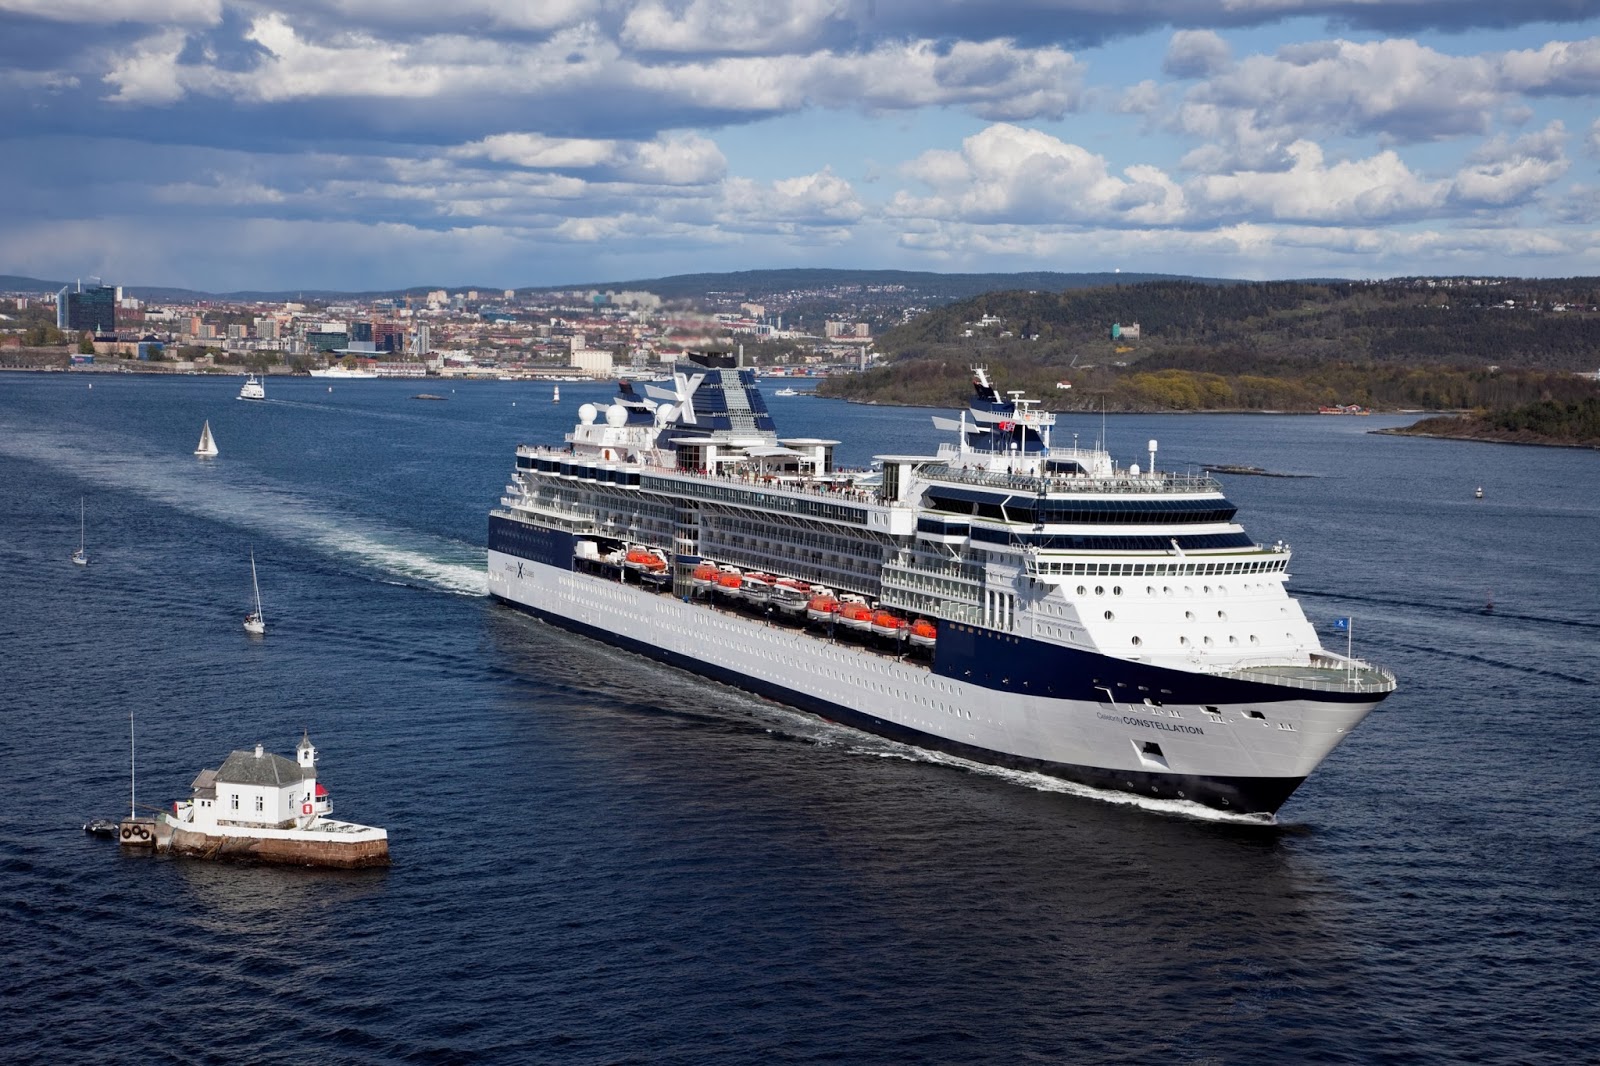 Celebrity Constellation Crew Member Goes Overboard | CruiseMiss Cruise Blog